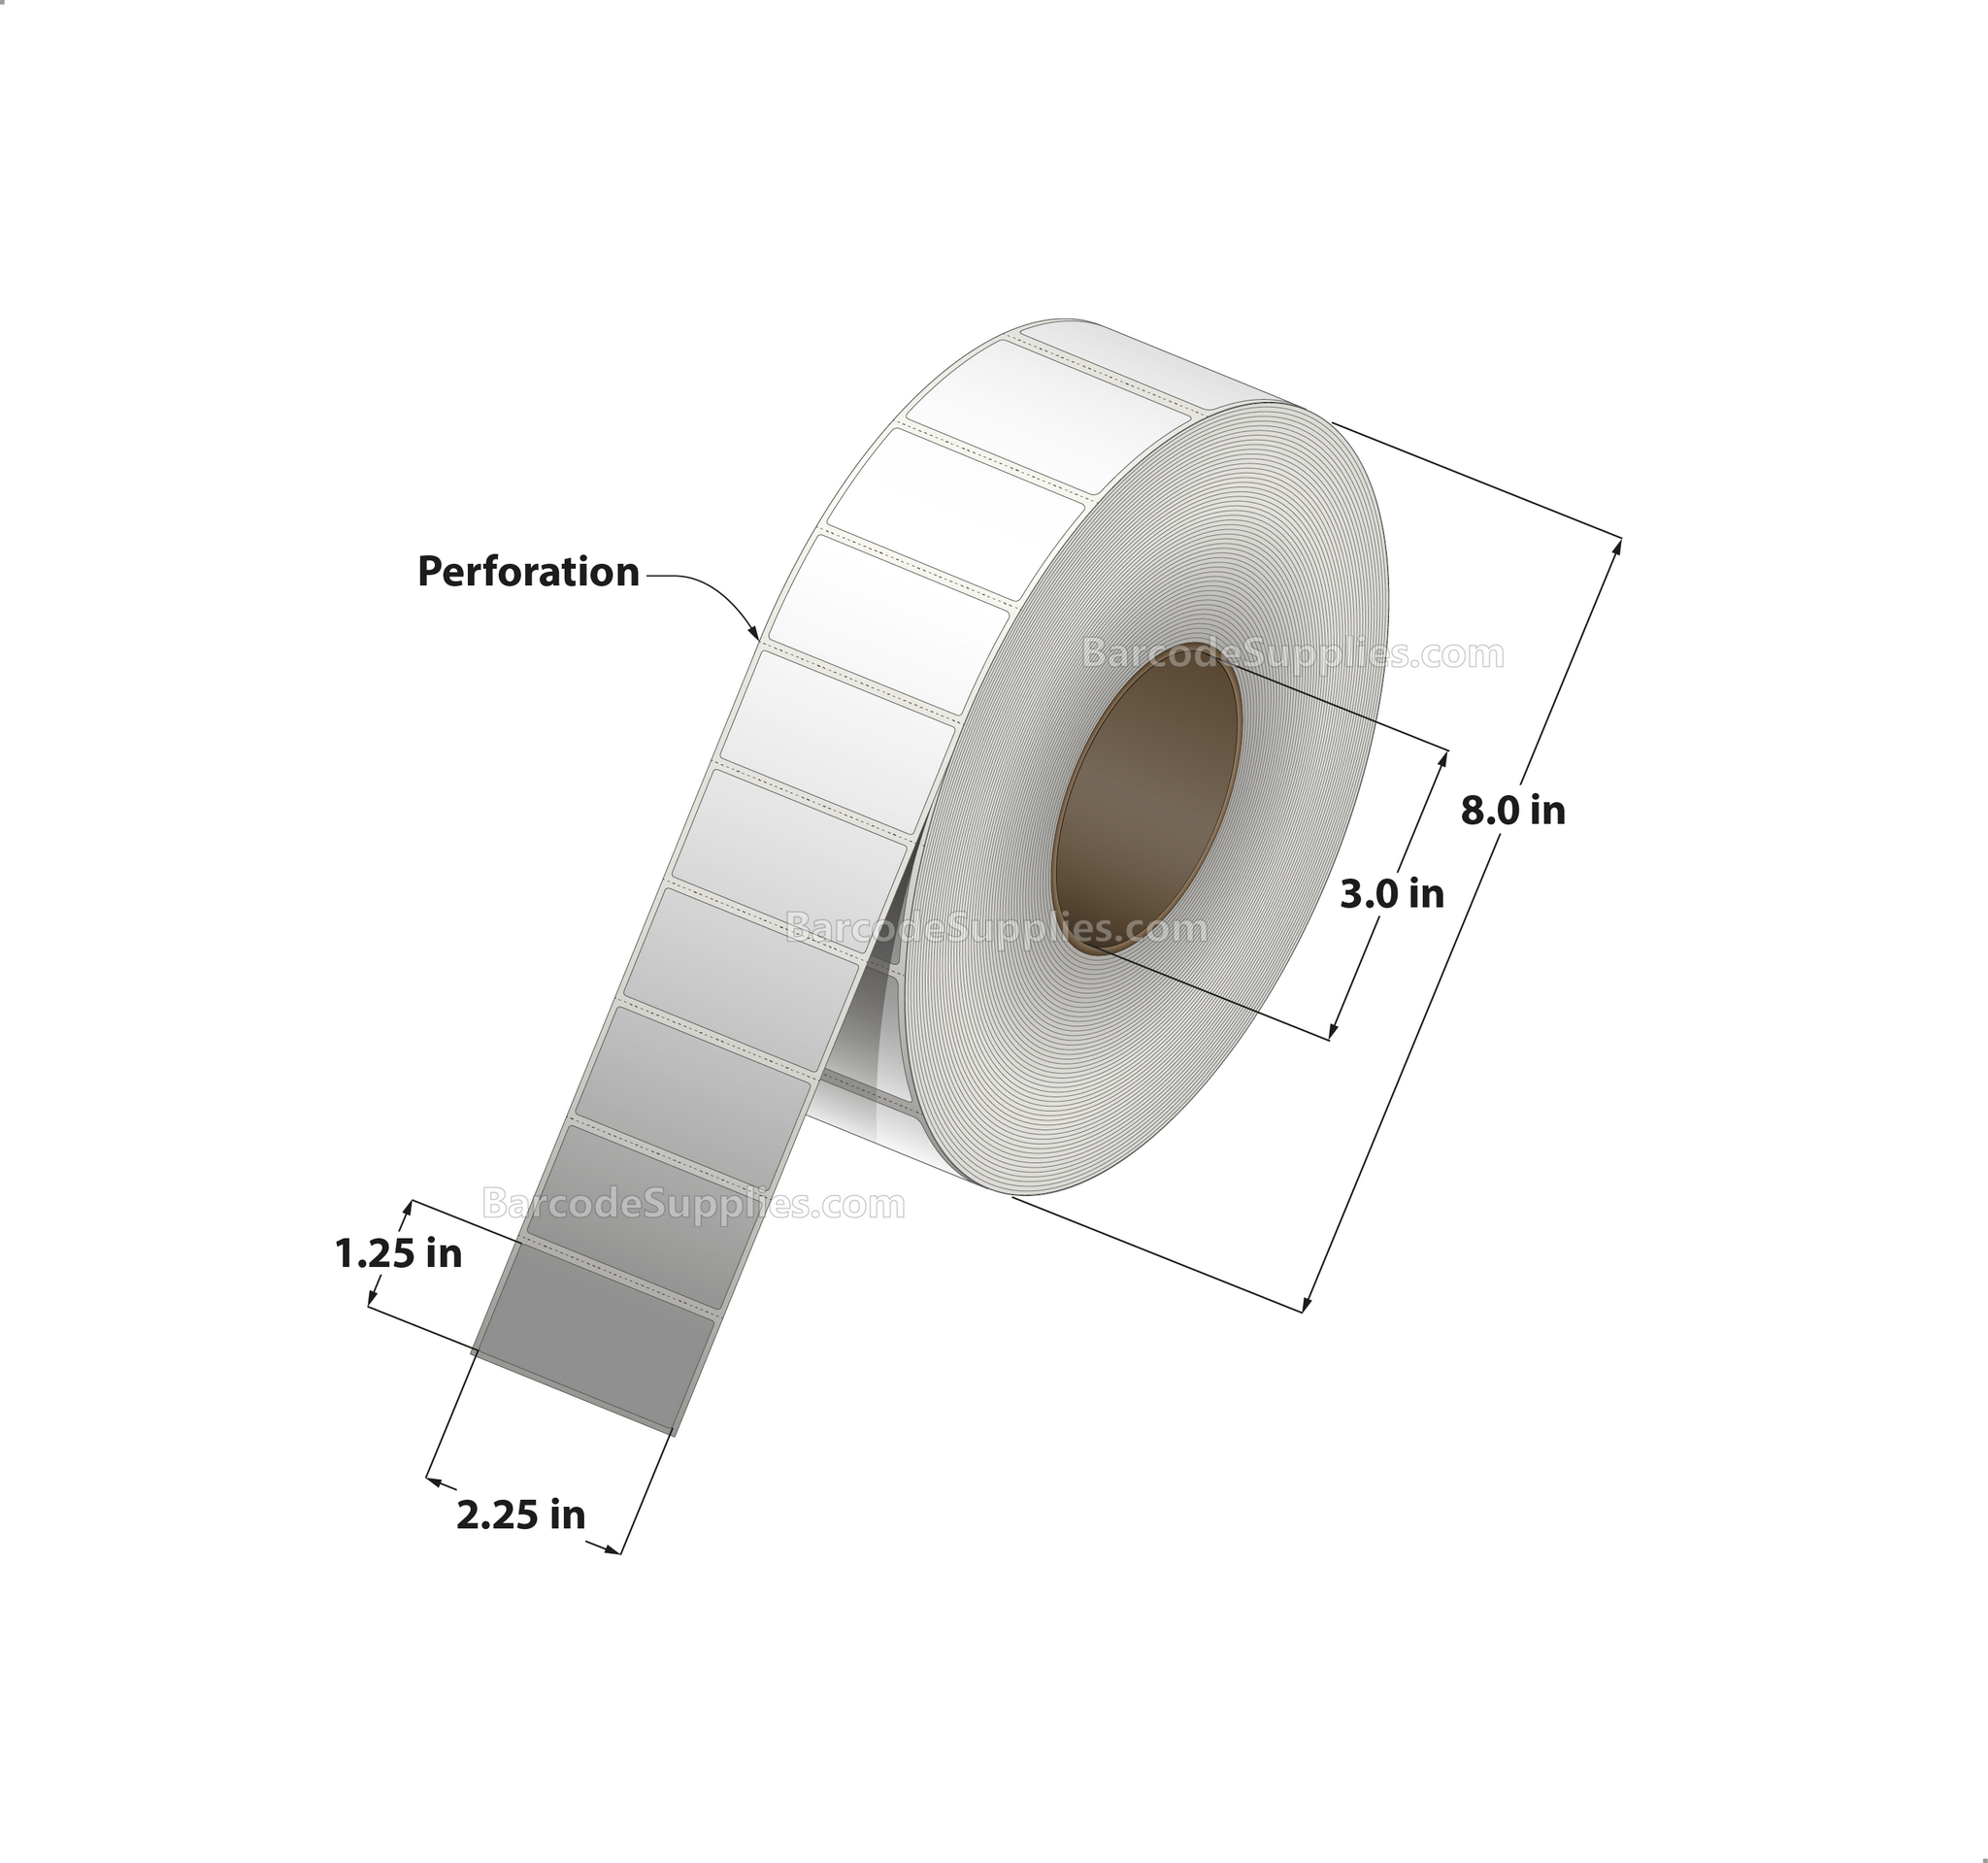 2.25 x 1.25 Direct Thermal White Labels With Acrylic Adhesive - Perforated - 4450 Labels Per Roll - Carton Of 8 Rolls - 35600 Labels Total - MPN: RD-225-125-4450-3 - BarcodeSource, Inc.